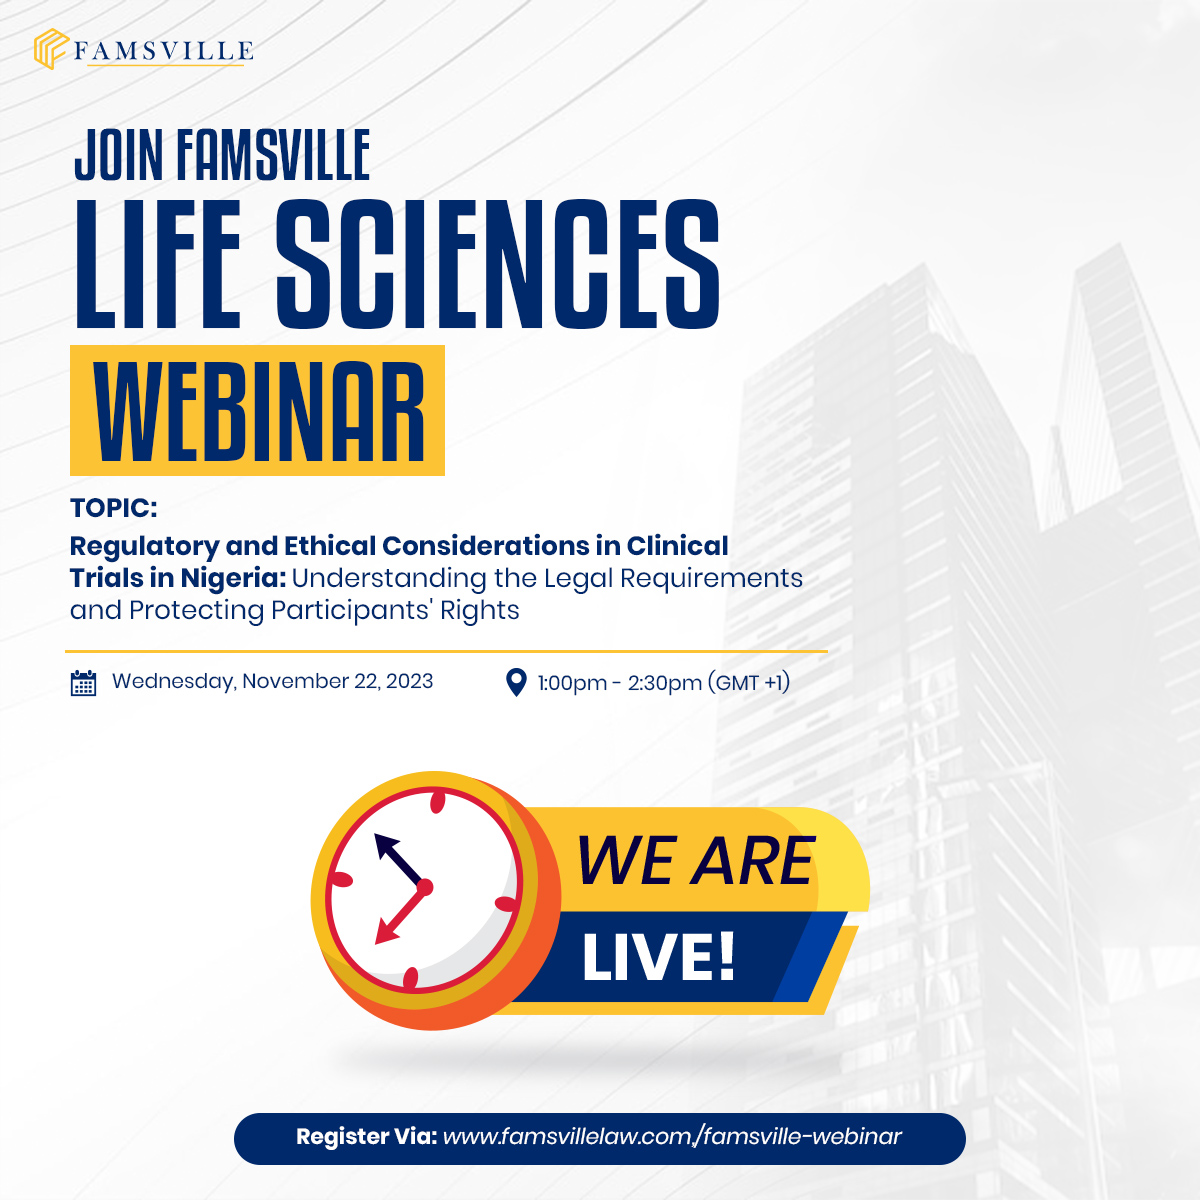 Famsville’s Life Science Webinar is Now Live.

You can join the conversation with this link: bit.ly/FamsvilleLifeS…

See you there!

 #lifescienceindustry #medicalregulatories #ethicalresearch #NigerianHealthcare #RegulatoryCompliance #medicalethics #healthlaw